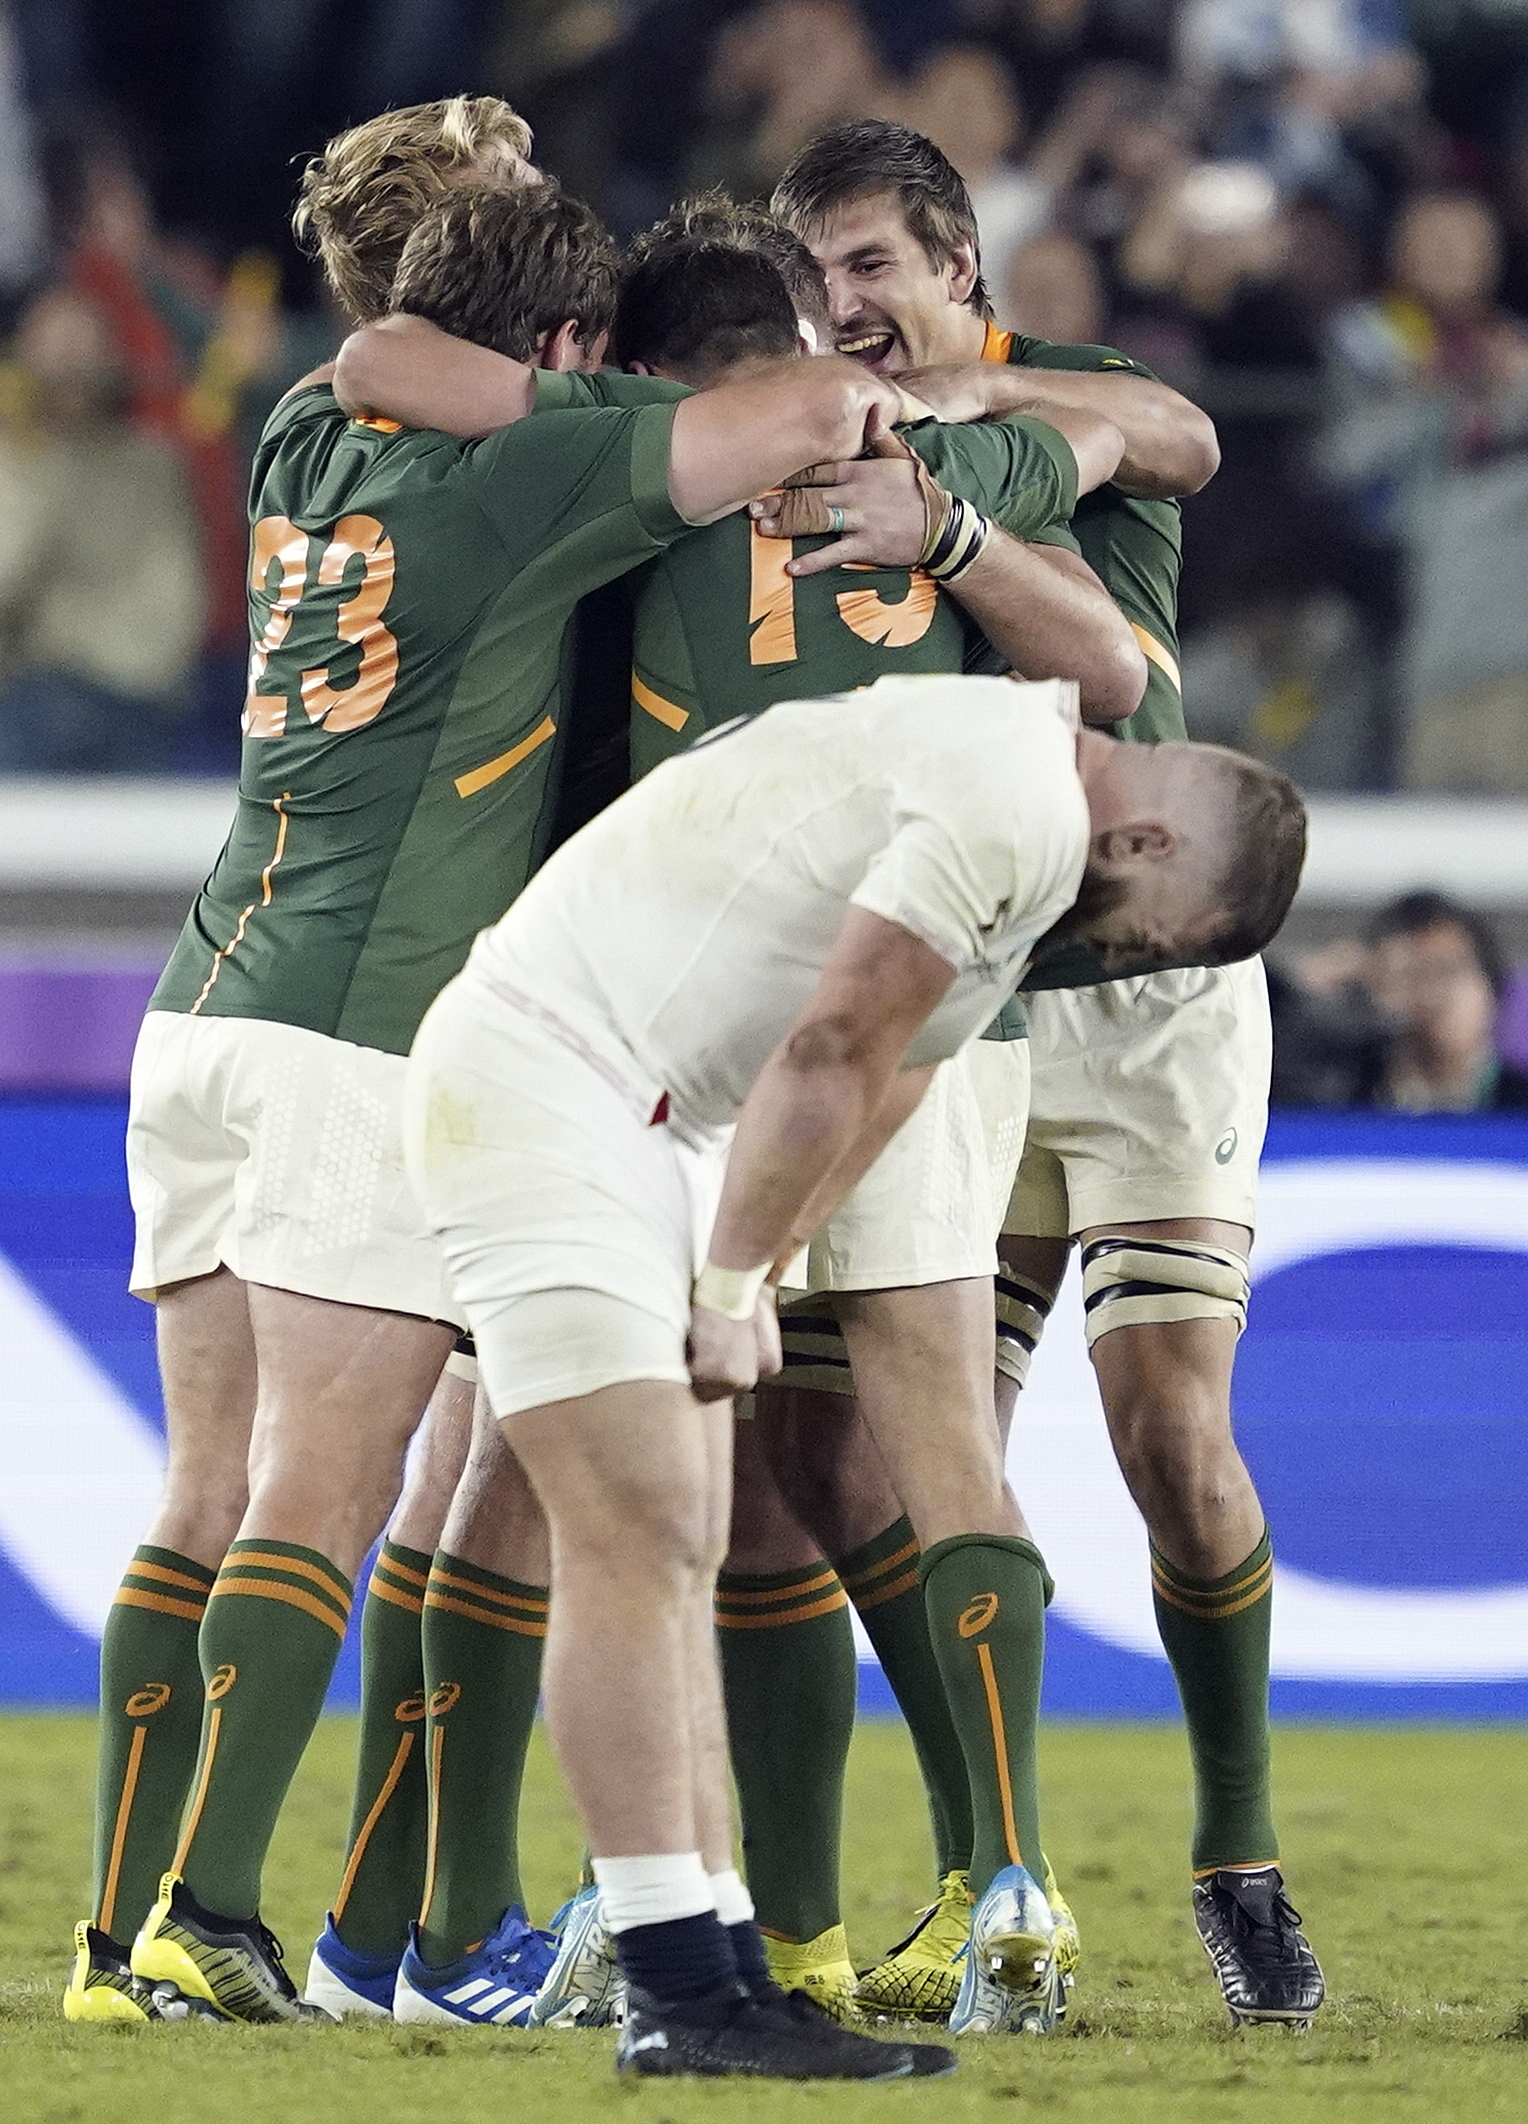 epa07966329 Players react after the Rugby World Cup final match between England and South Africa at the International Stadium Yokohama, Kanagawa Prefecture, Yokohama, Japan, 02 November 2019. EPA-EFE/FRANCK ROBICHON EDITORIAL USE ONLY/ NO COMMERCIAL SALES / NOT USED IN ASSOCATION WITH ANY COMMERCIAL ENTITY